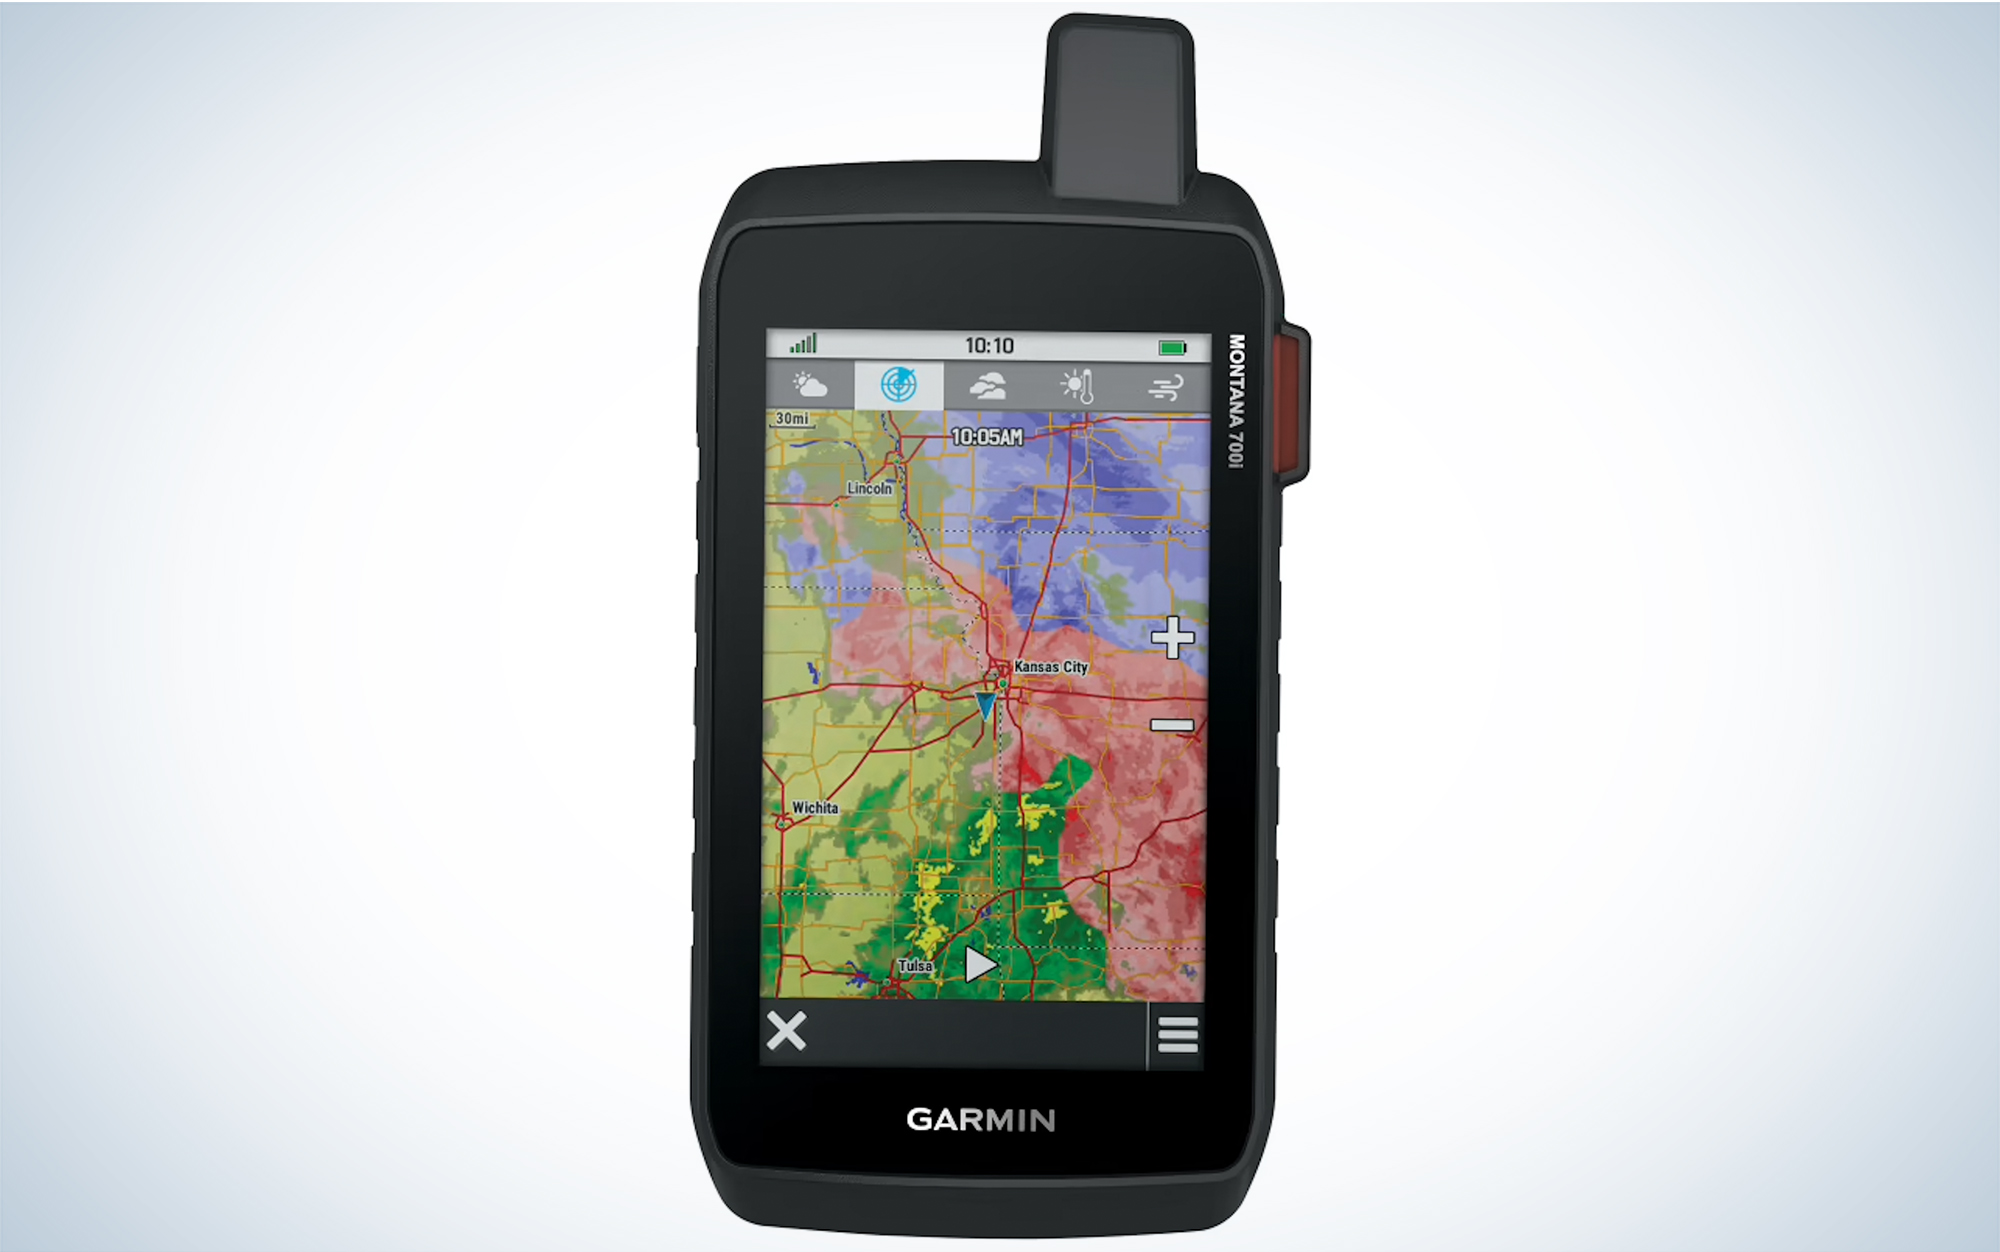 The Garmin Montana 700i is the best GPS for ATVs.